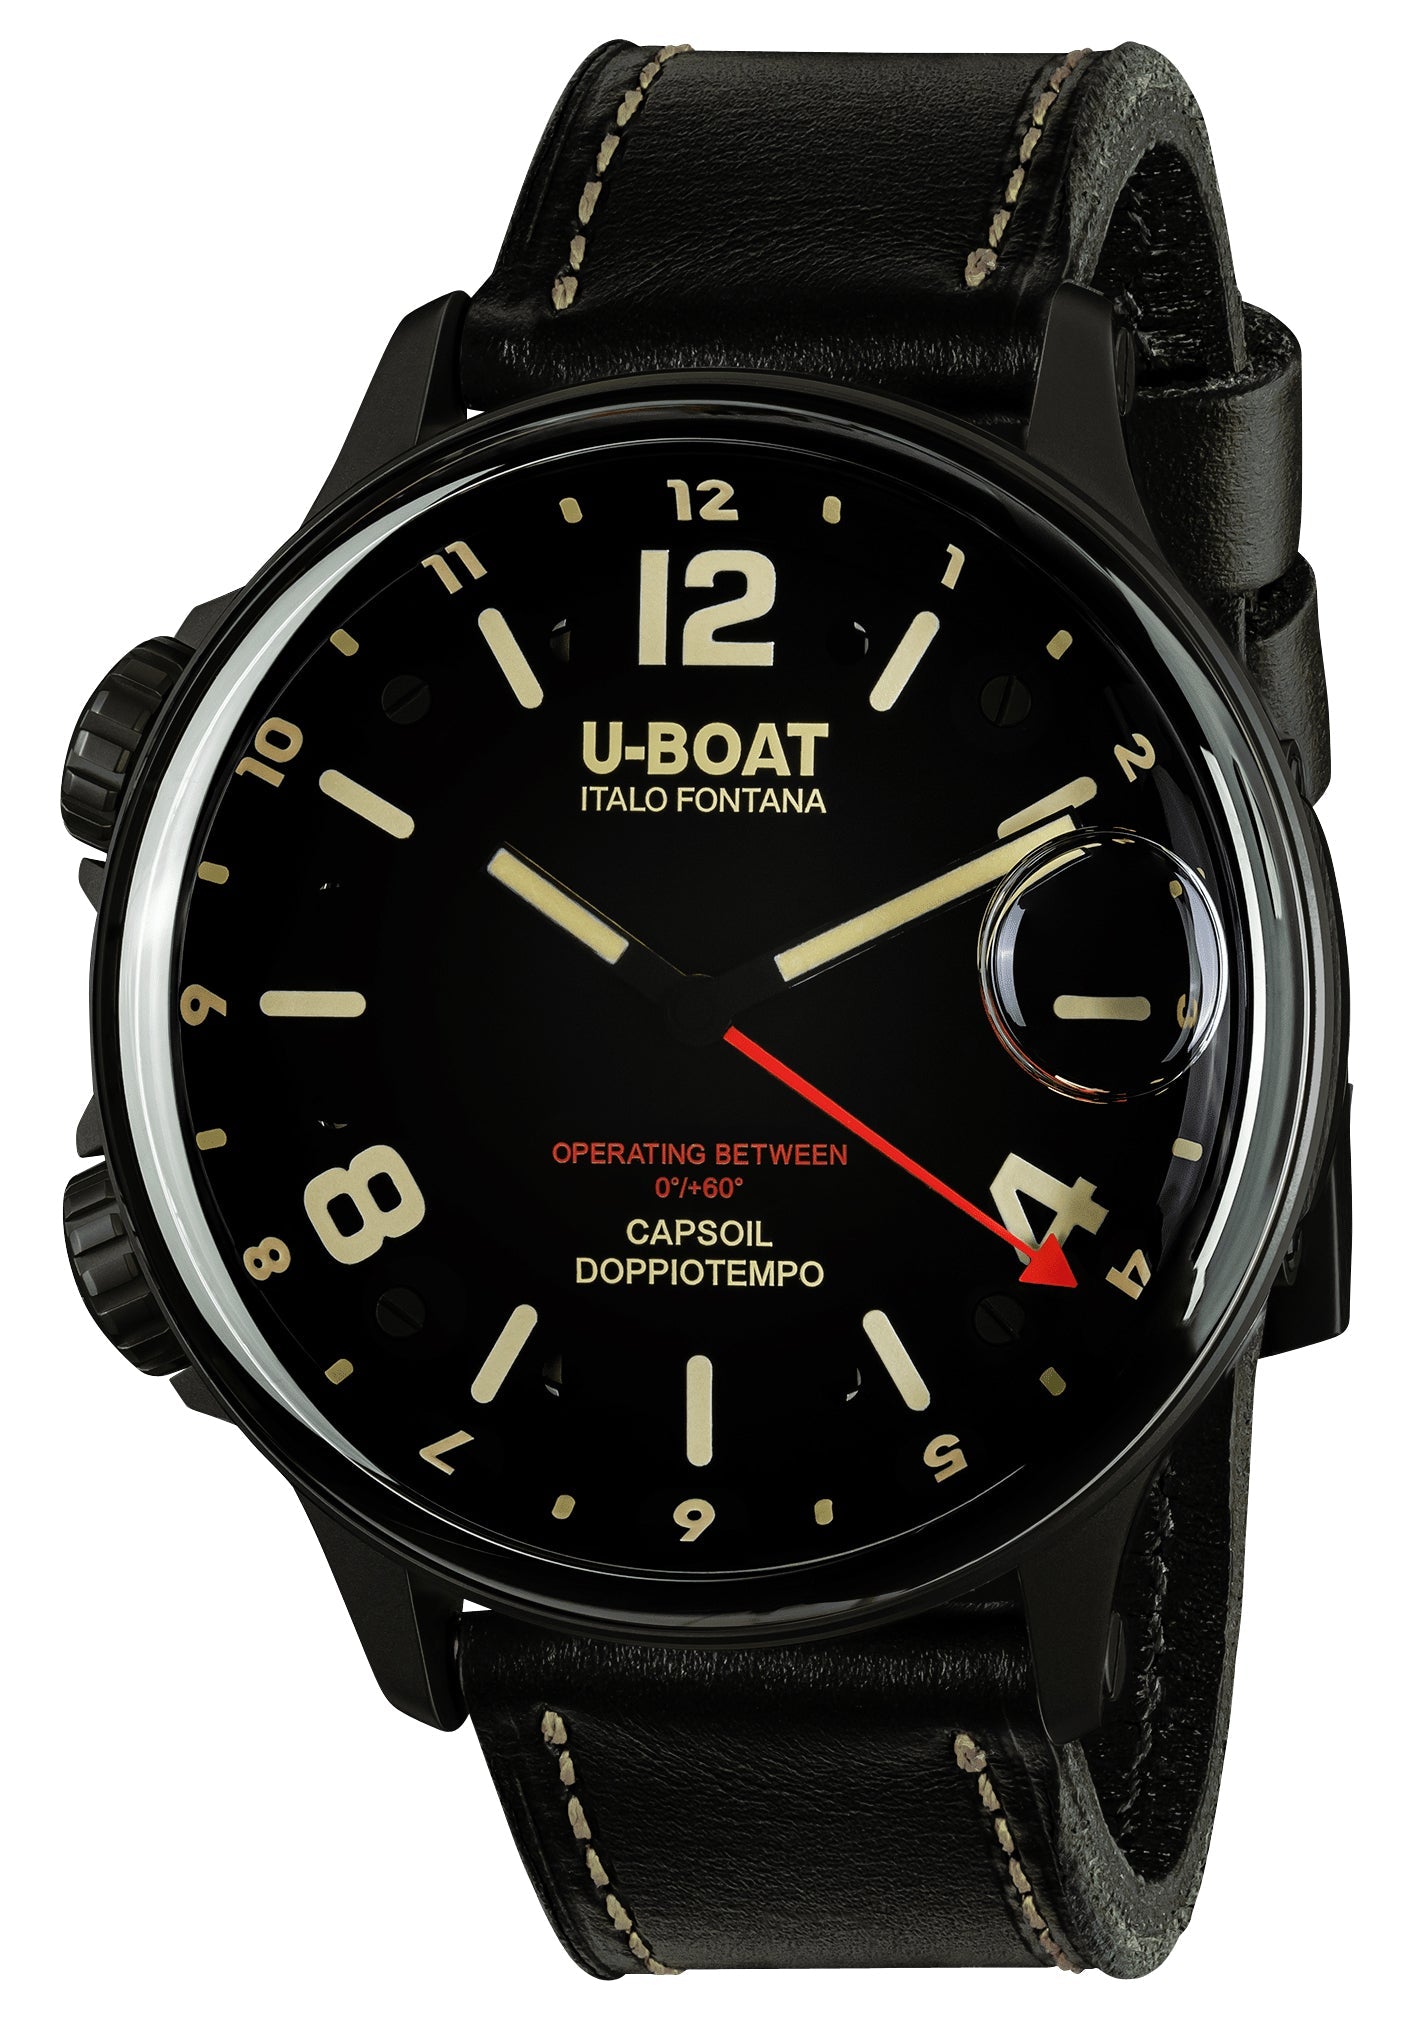 update alt-text with template Watches - Mens-U-Boat-9671-12-hour display, > 50 mm, bi-directional rotating bezel, black, black PVD case, Capsoil Doppiotempo, dual time zone, interchangeable band, leather, mens, menswatches, new arrivals, round, rpSKU_9672, rpSKU_9673, rpSKU_9674, rpSKU_9675, rpSKU_9676, swiss quartz, U-Boat, watches-Watches & Beyond